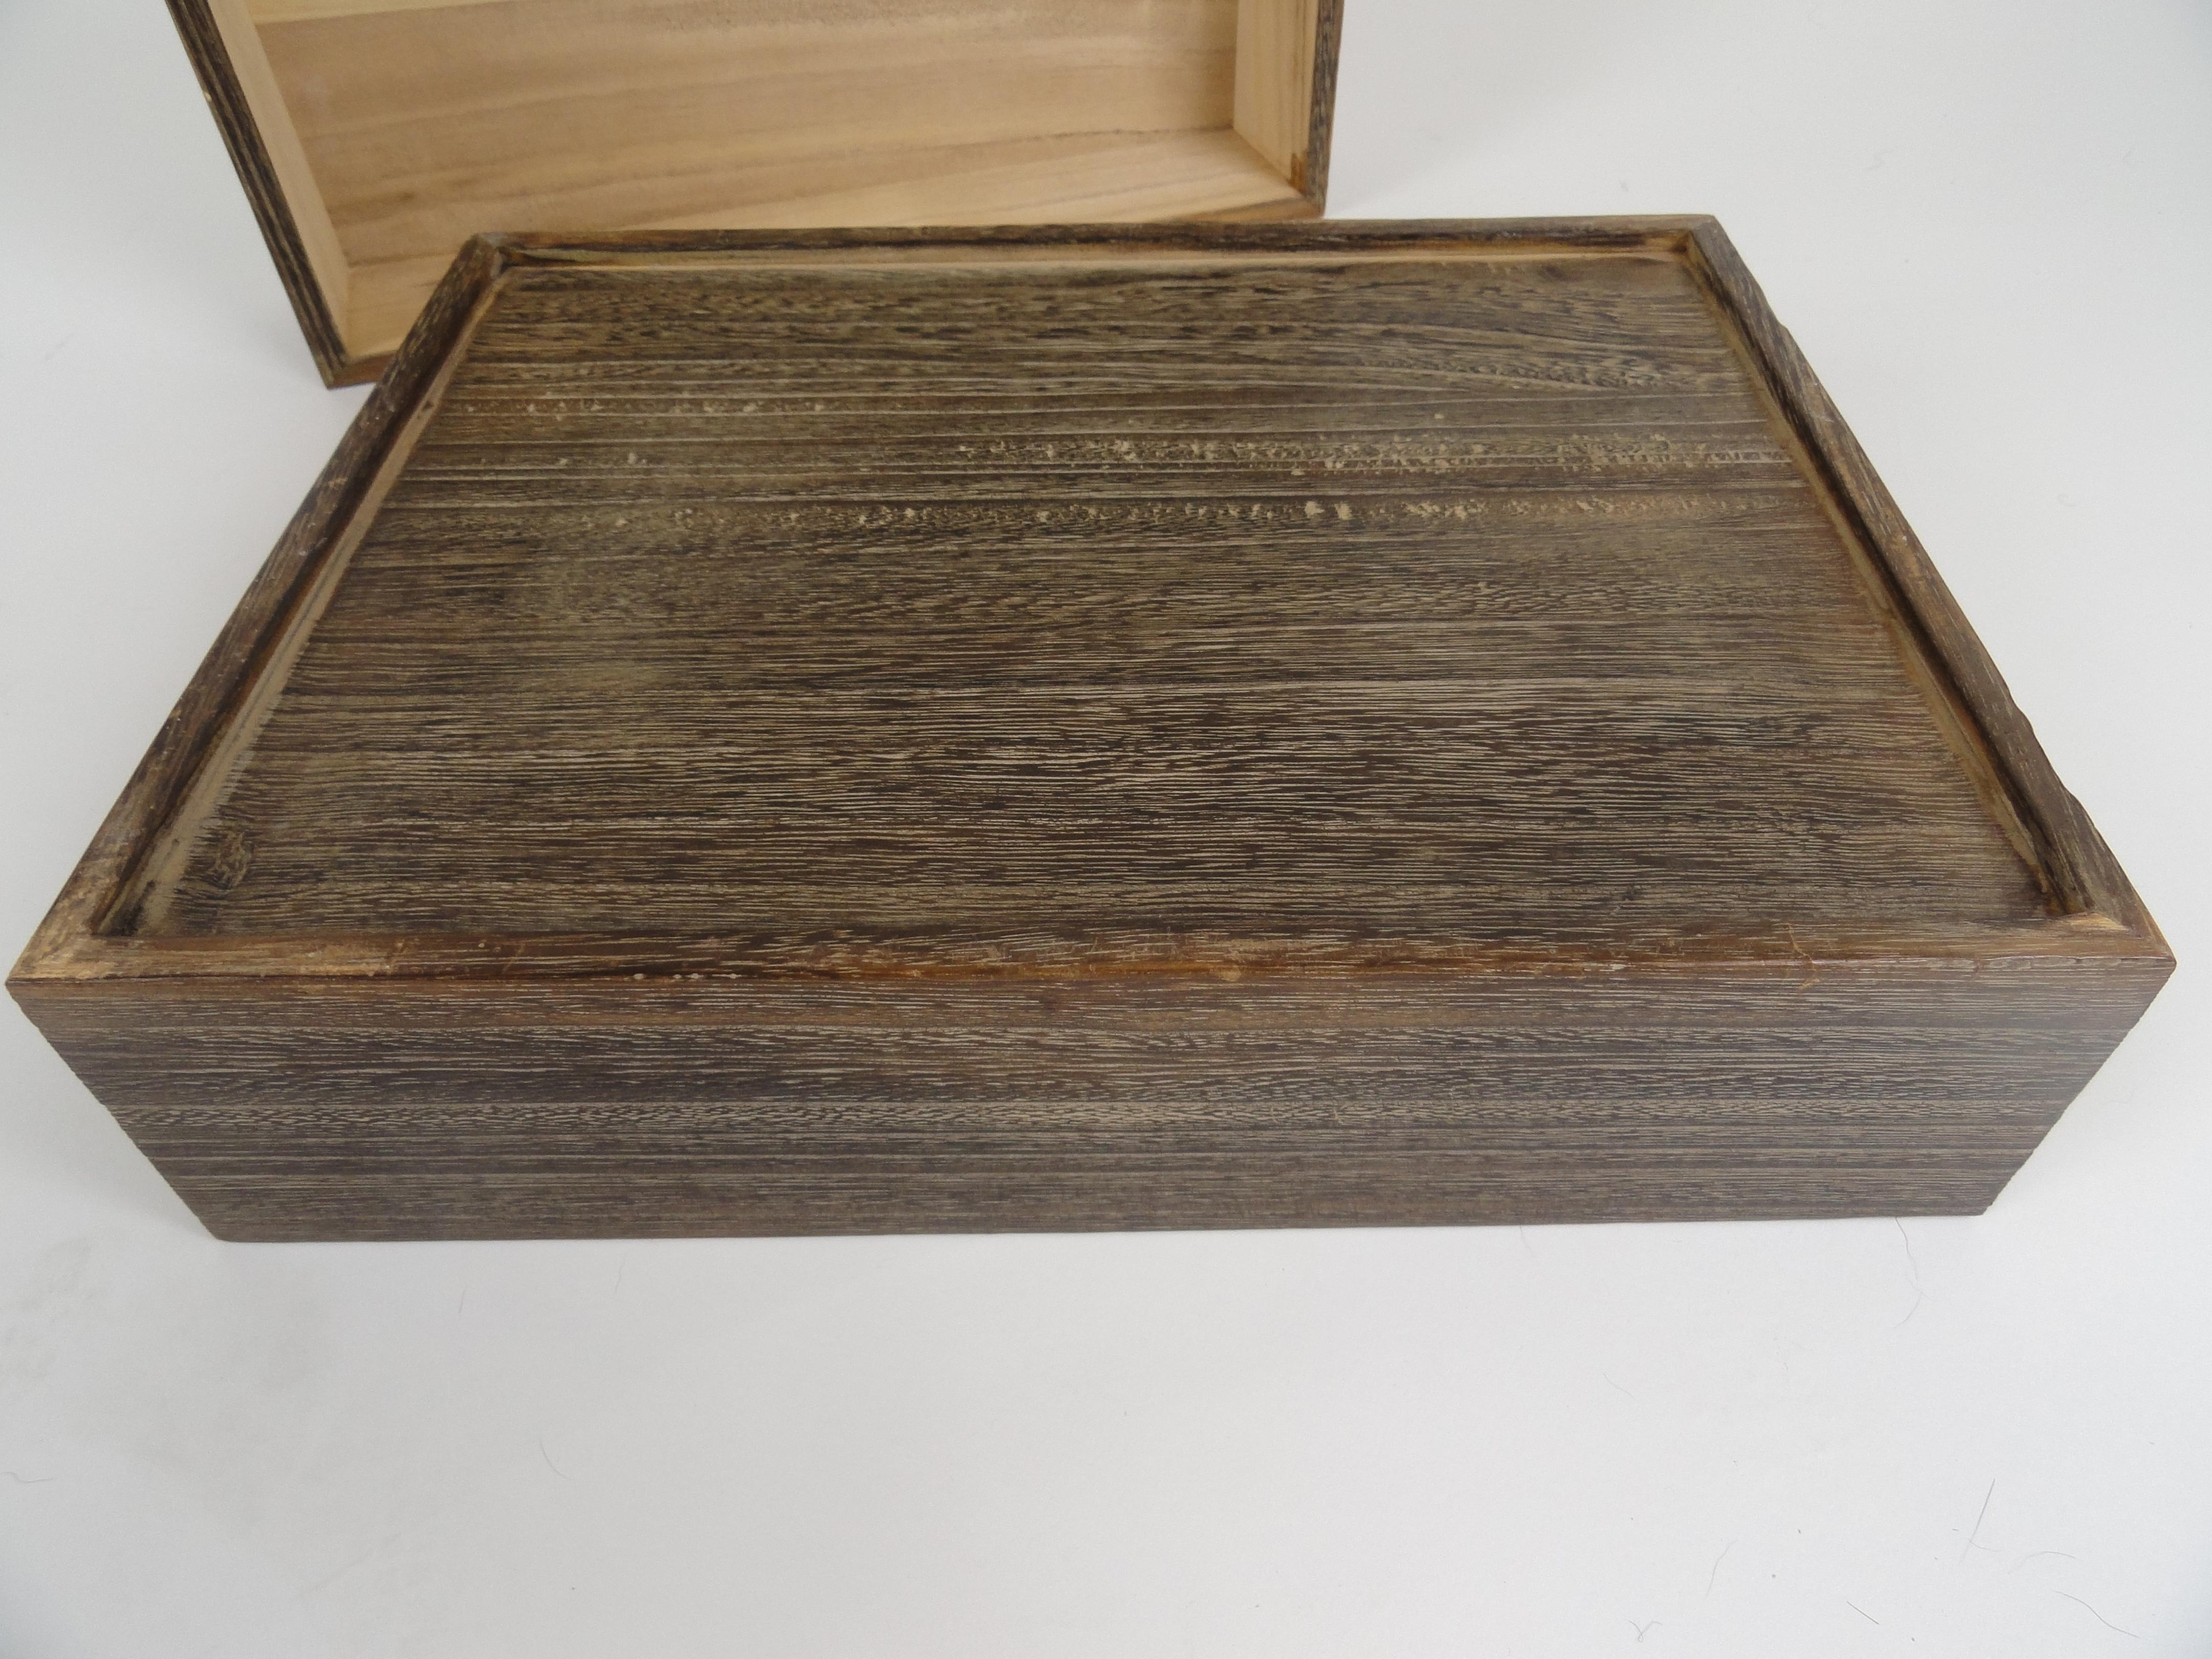 Late 20th Century Japanese Wood Box For Sale